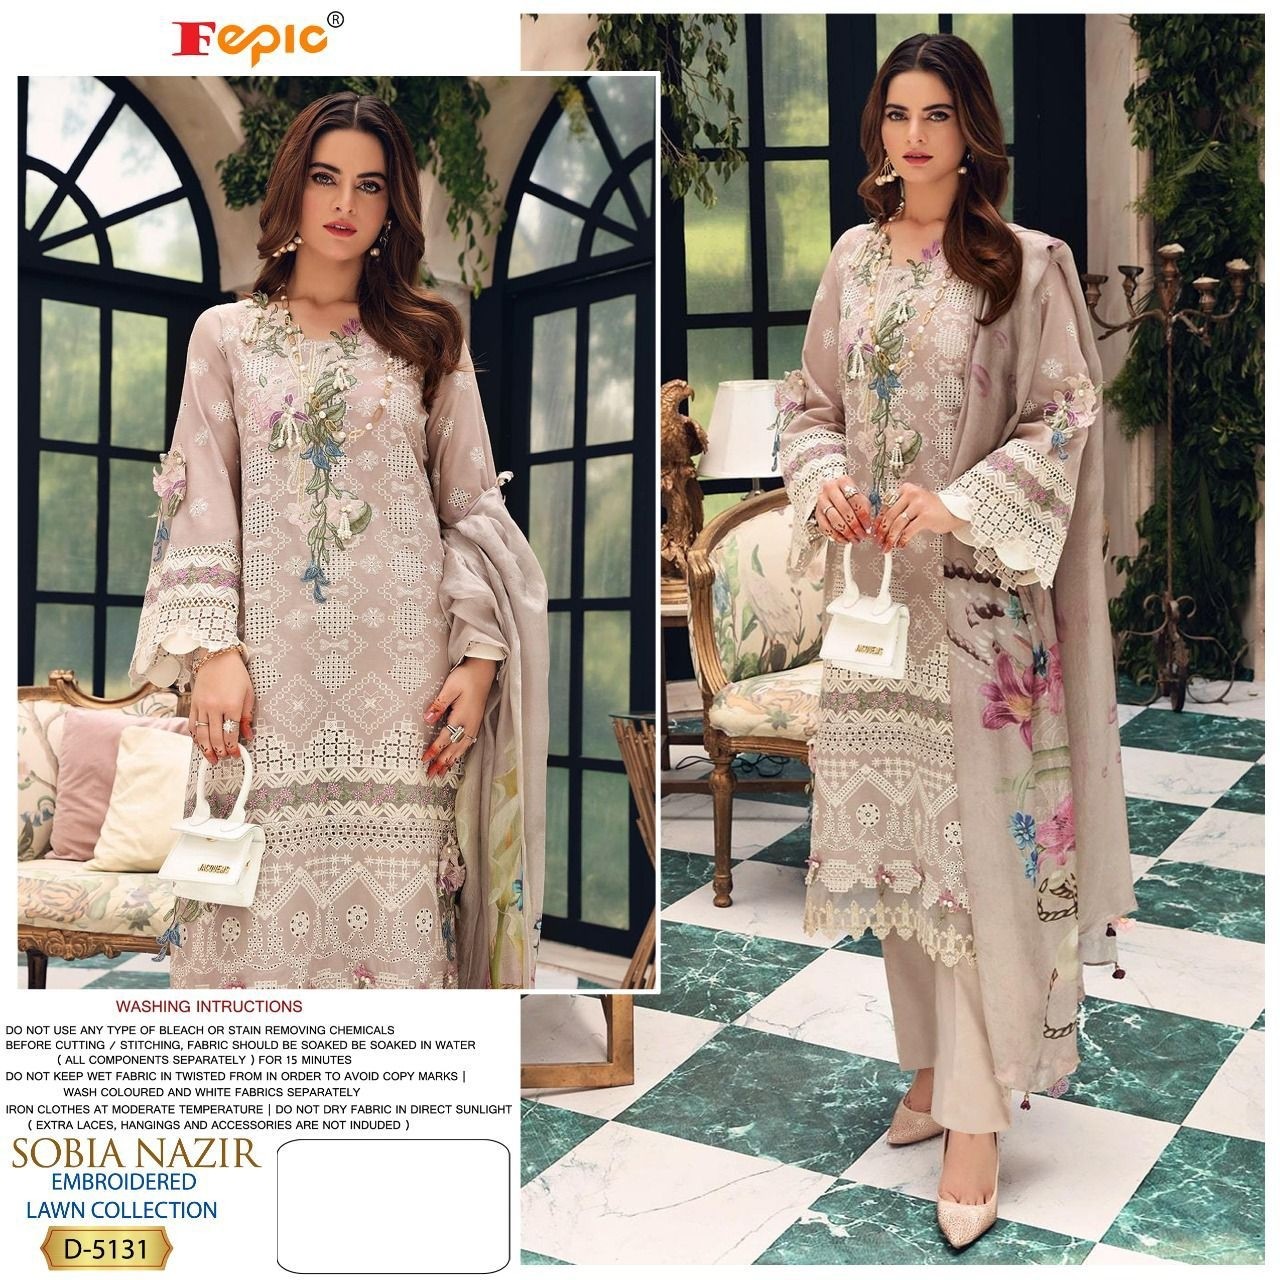 FEPIC ROSEMEEN SOBIA NAZIR EMBROIDERED LAWN COLLECTION D 5131 WHOLESALER SINGALE